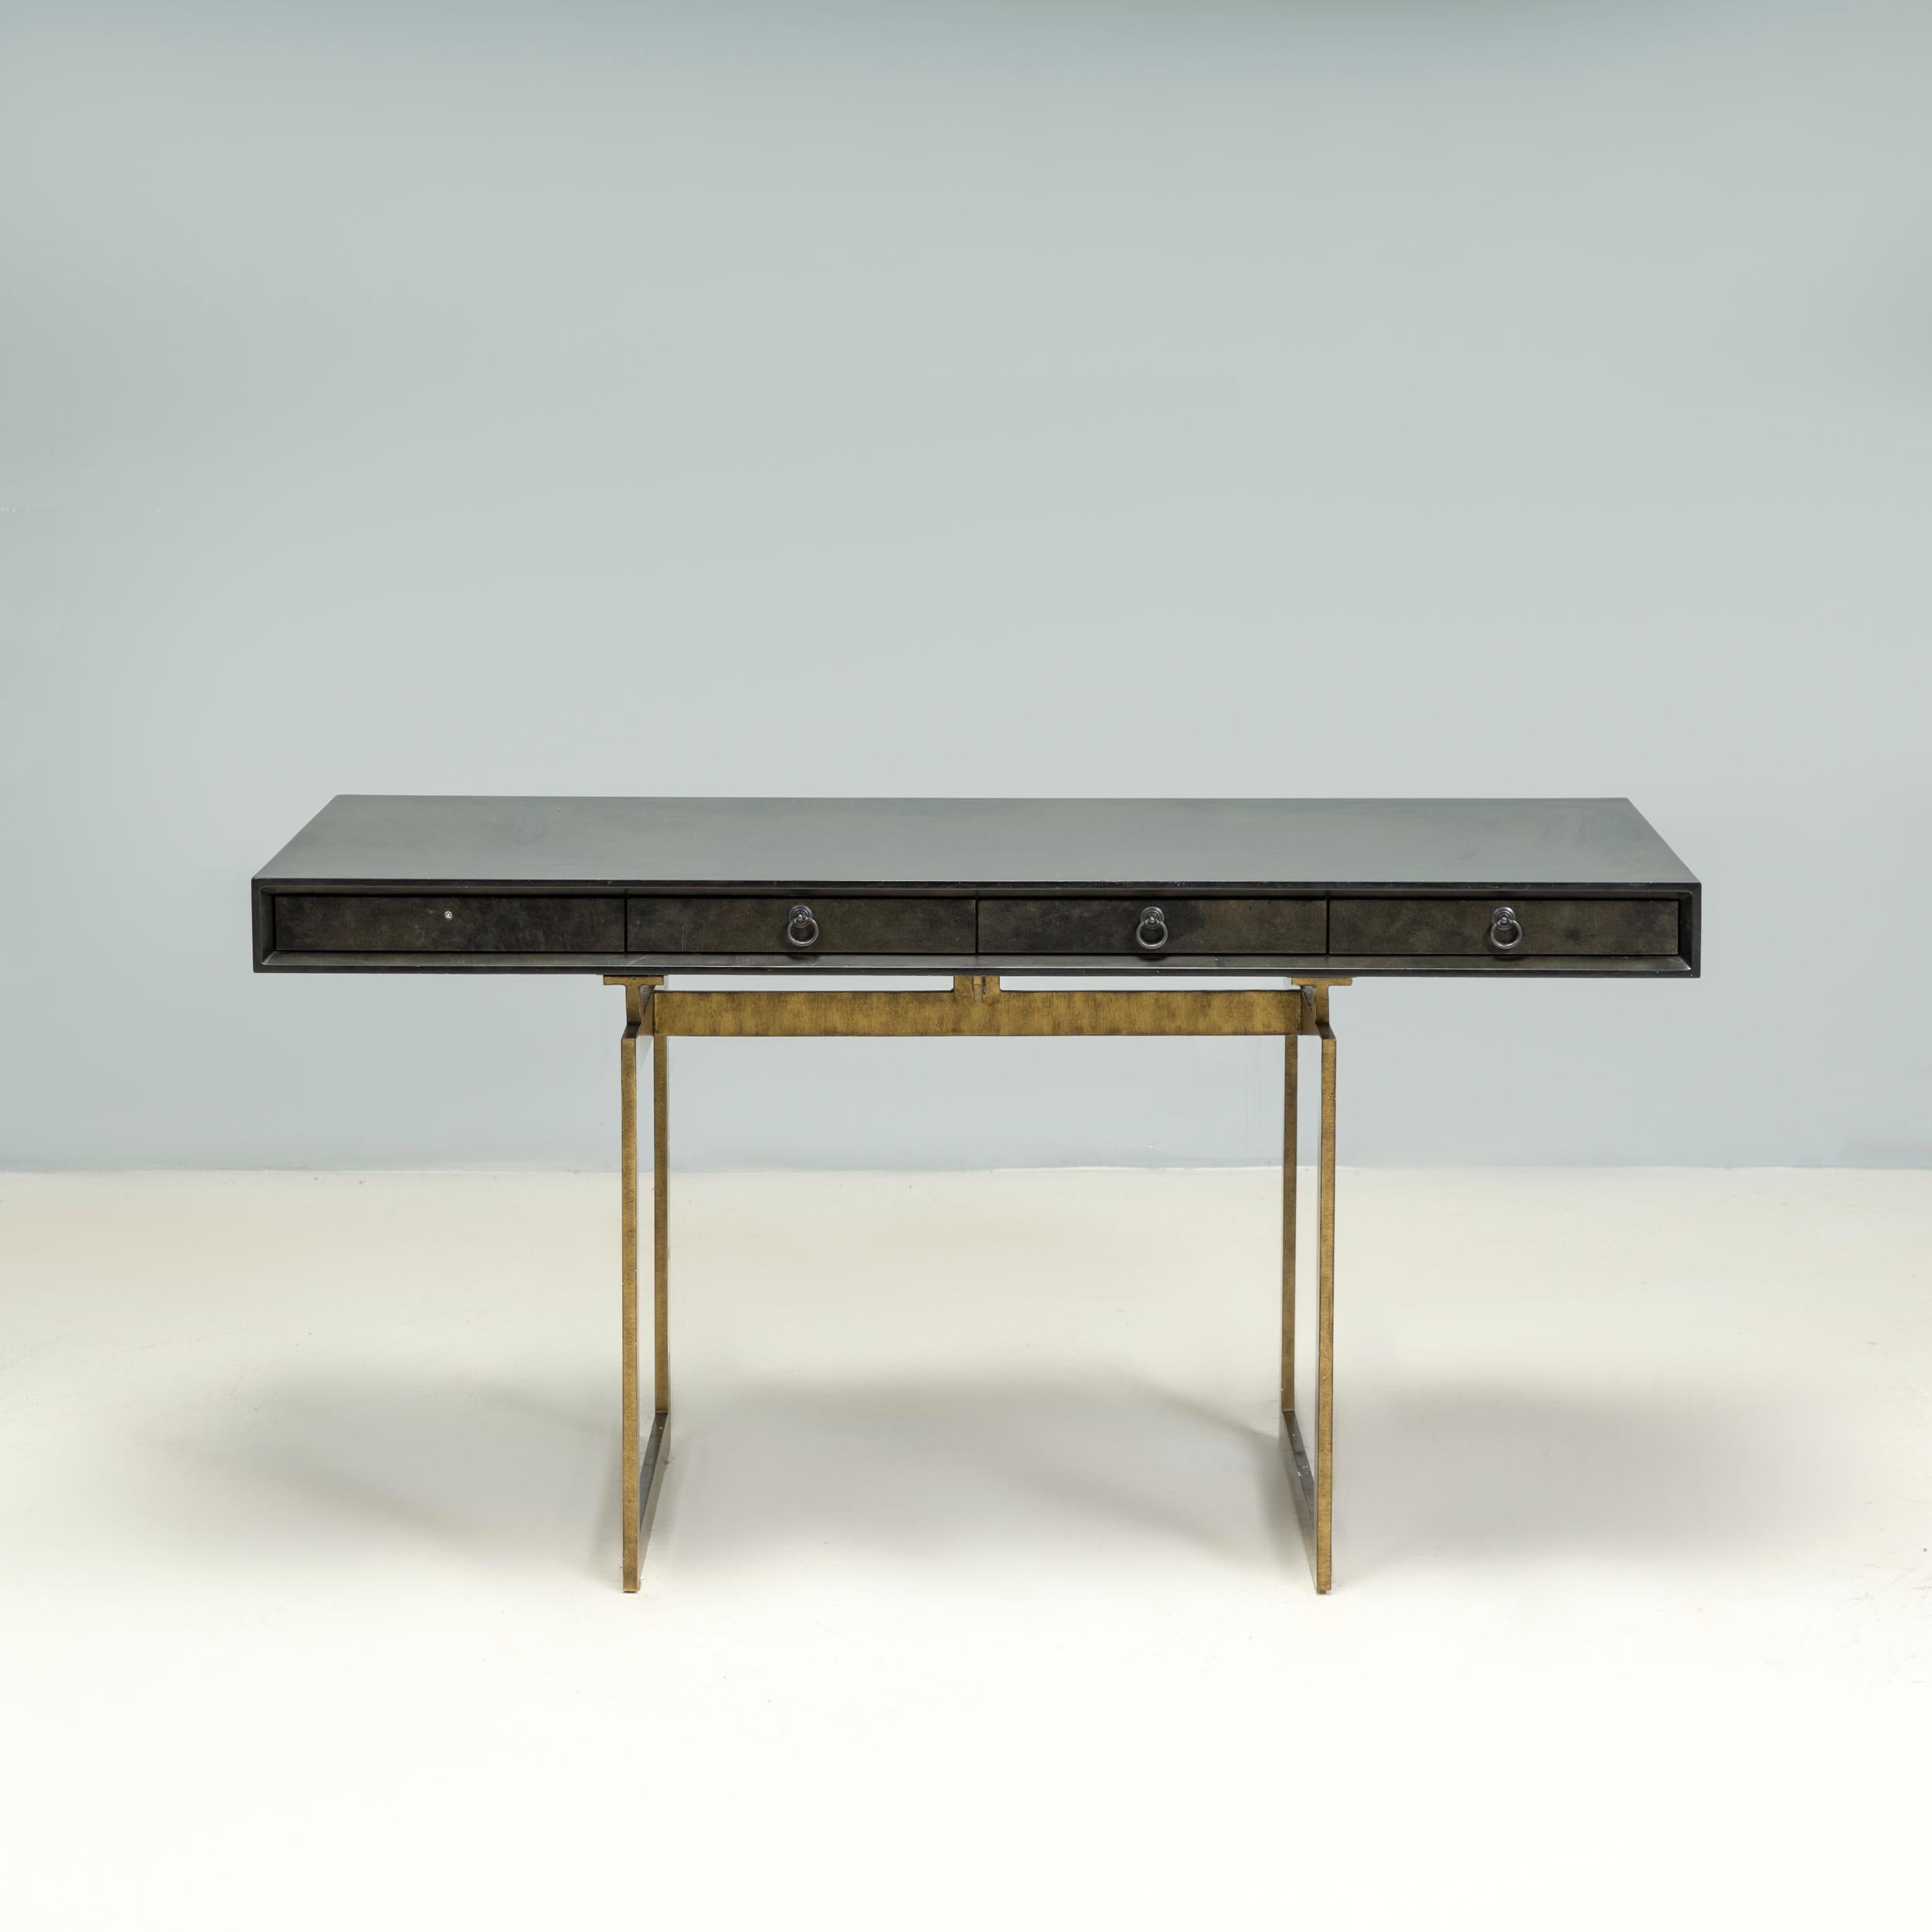 Julian Chichester founded his furniture design company in 1995, inspired by the classic shapes from the 19th and 20th centuries and adding his own unique twist through contemporary finishes and details.

The Cortes desk is inspired by 1950s Danish